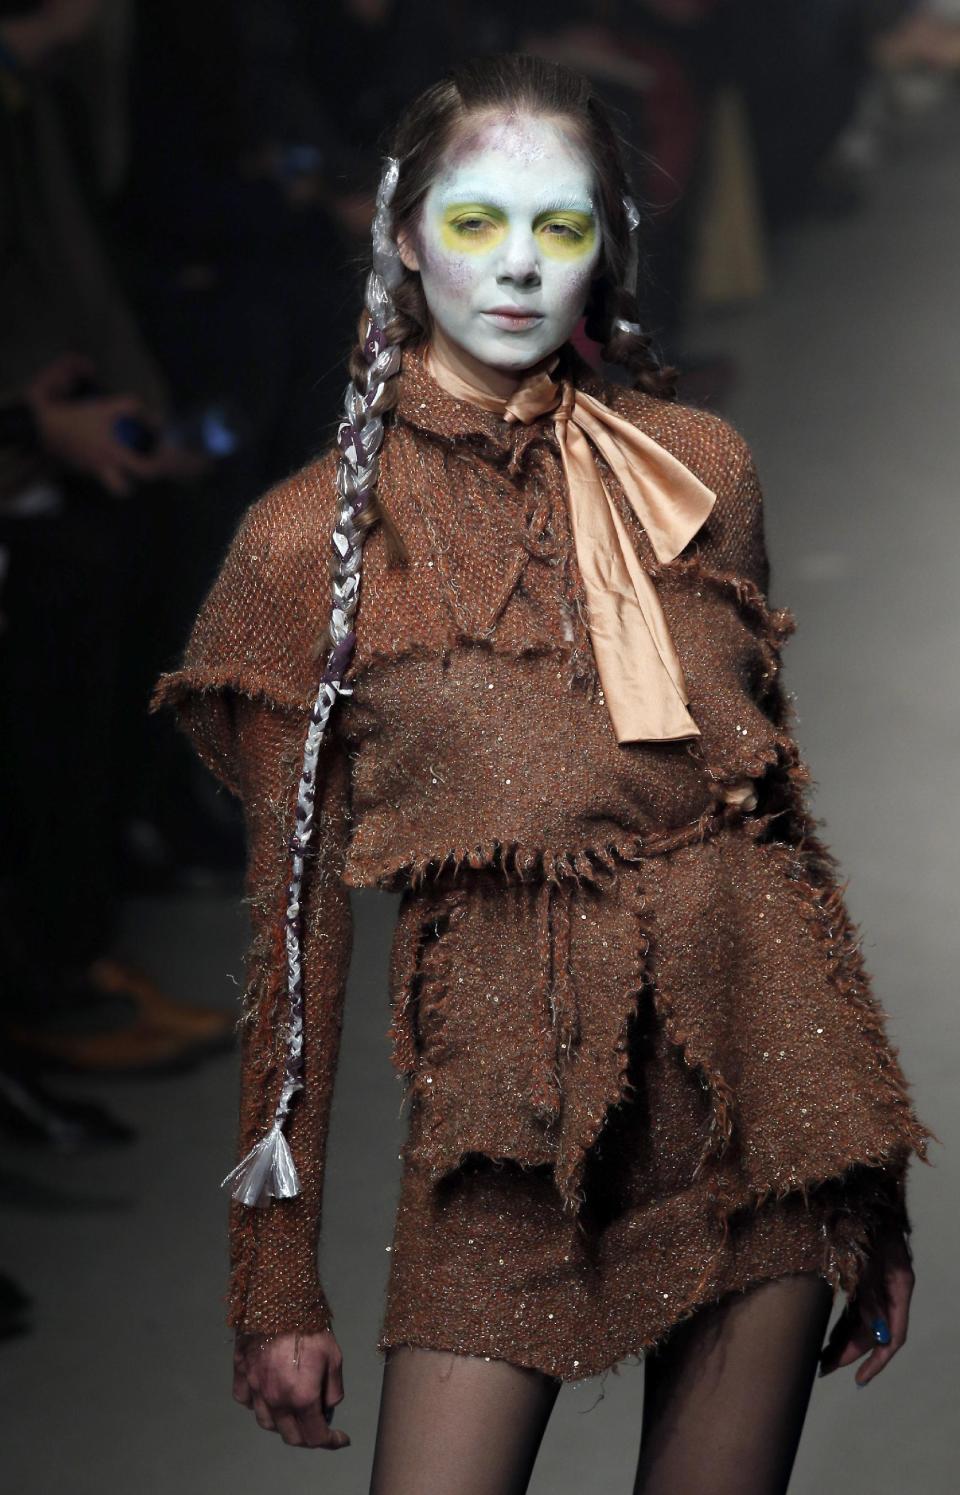 A model wears a creation by designer Vivienne Westwood for her Fall/Winter 2013-2014 ready to wear collection, in Paris, Saturday, March 2, 2013. (AP Photo/Christophe Ena)